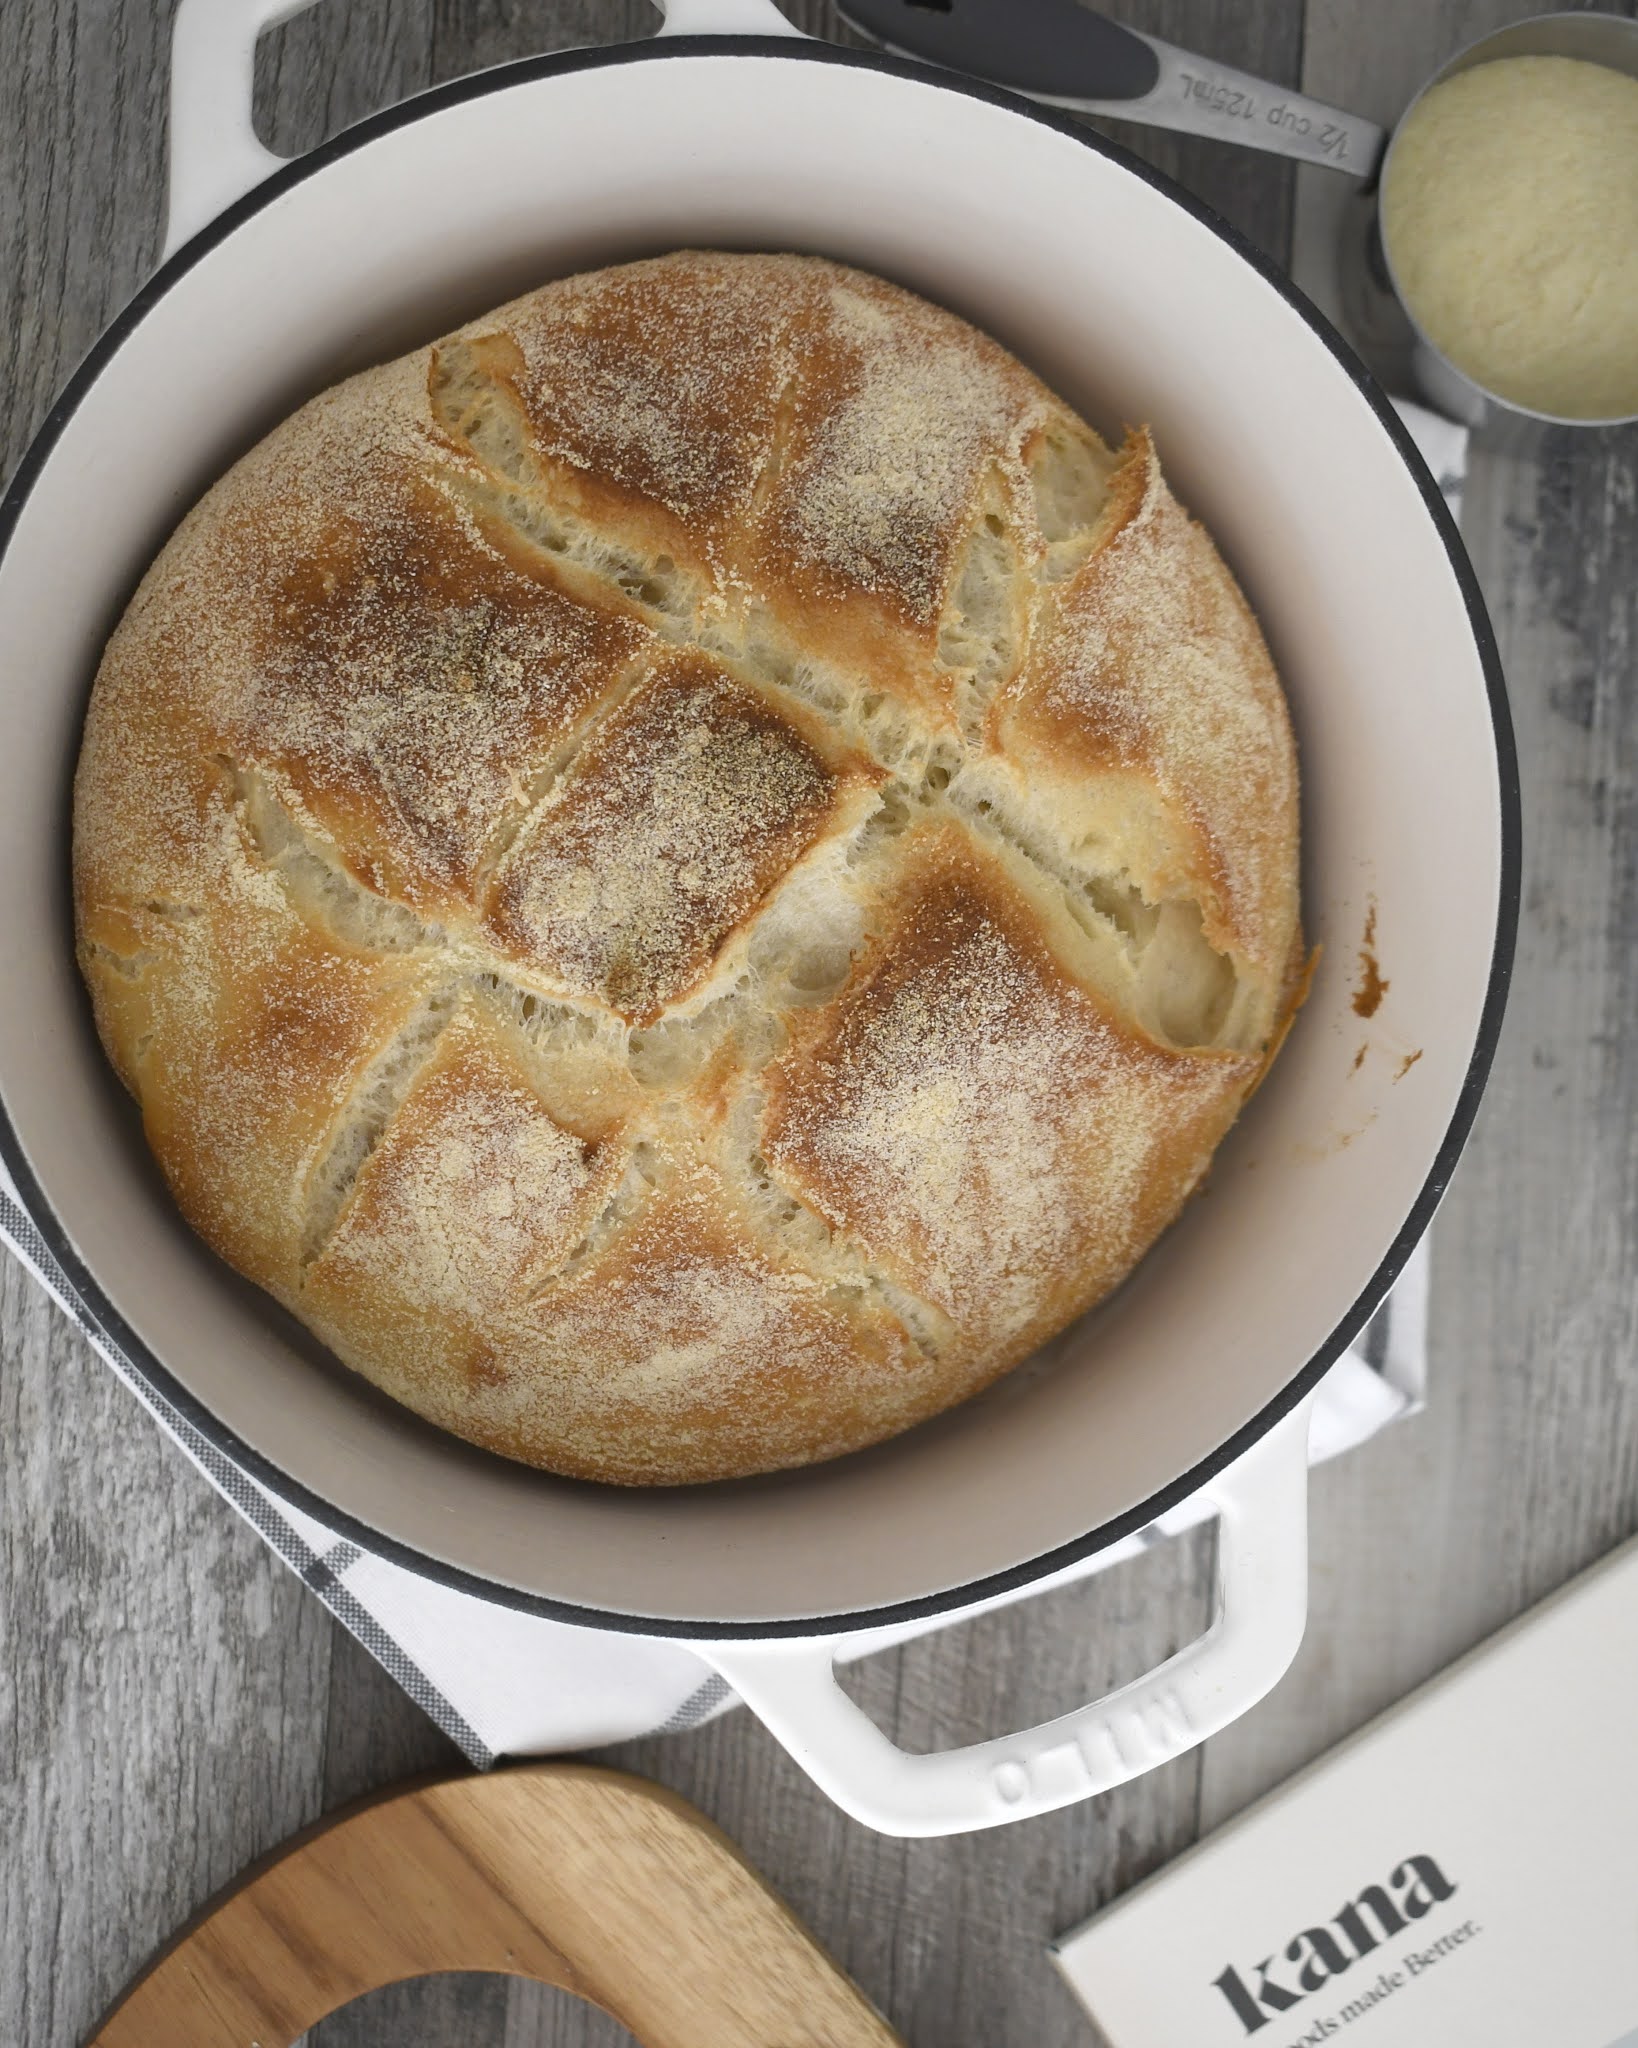 How to Bake No-Knead “Turbo” Bread in a Skillet (ready to bake in